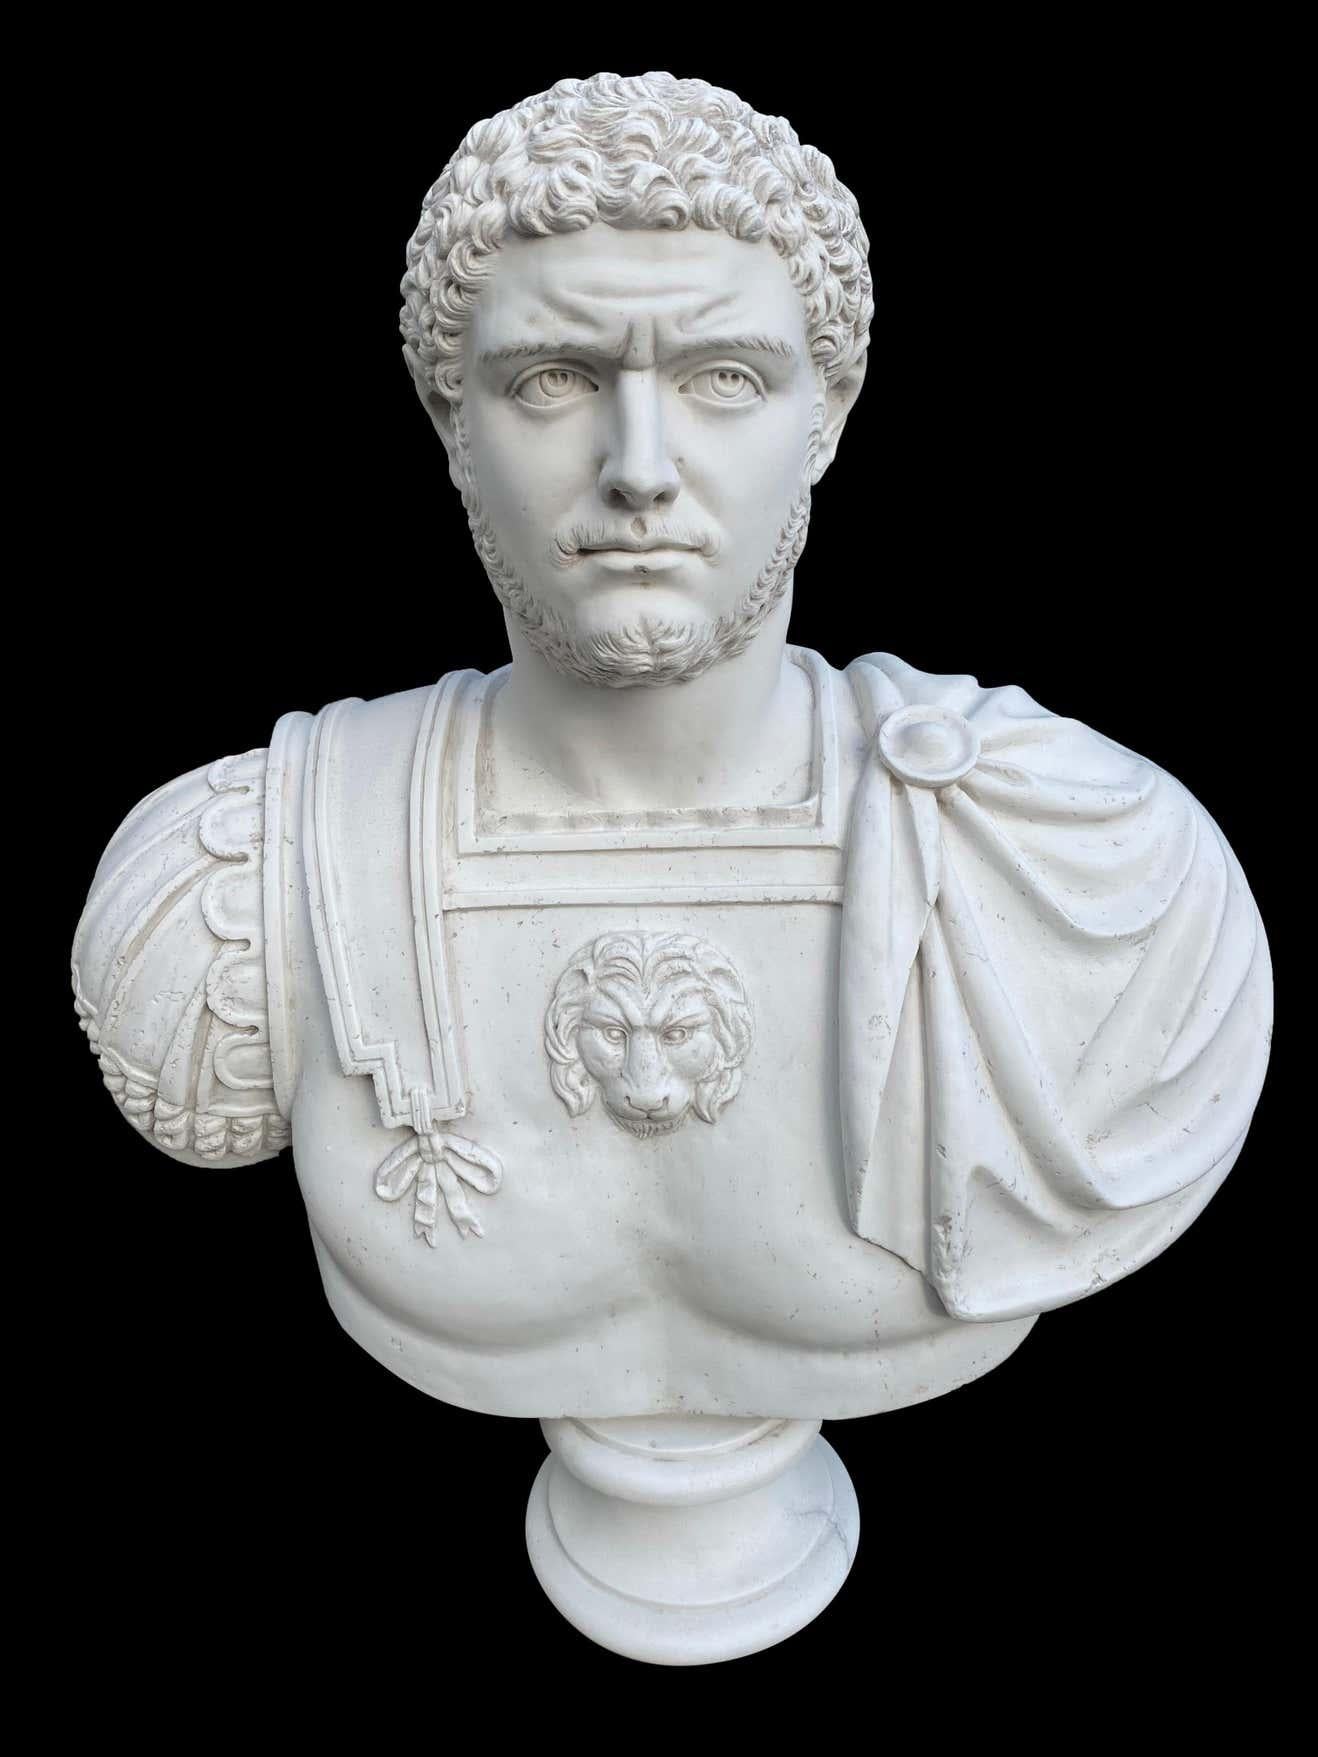 Caracalla Roman Emperor Grand Tour bust sculpture, 20th century.

This bust of Caracalla depicts him as a powerful man, of the large stature he was, and was purchased by a large English estate, from a 18th century Italian studio, later sold in